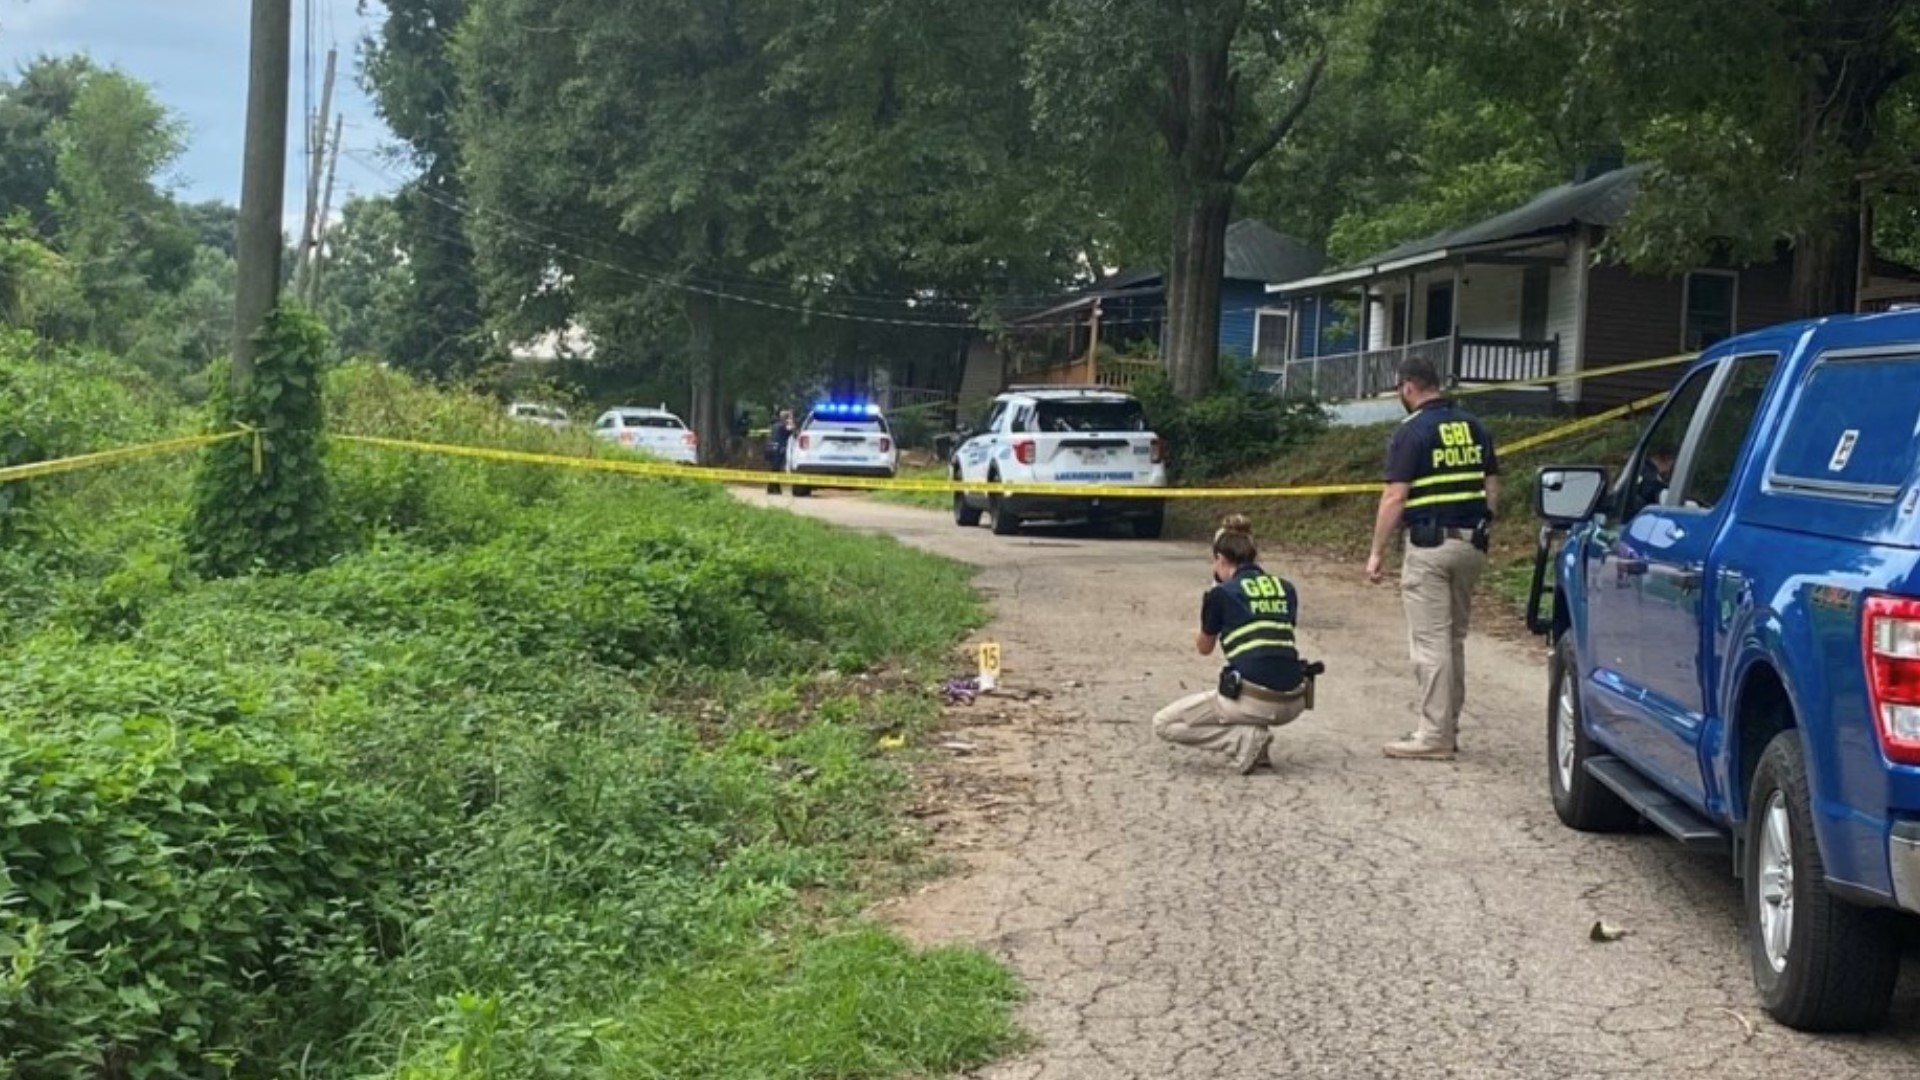 Police shot a man in LaGrange after he ran over his wife, ultimately dragging her under the car on Thursday in Troup County, according to GBI.